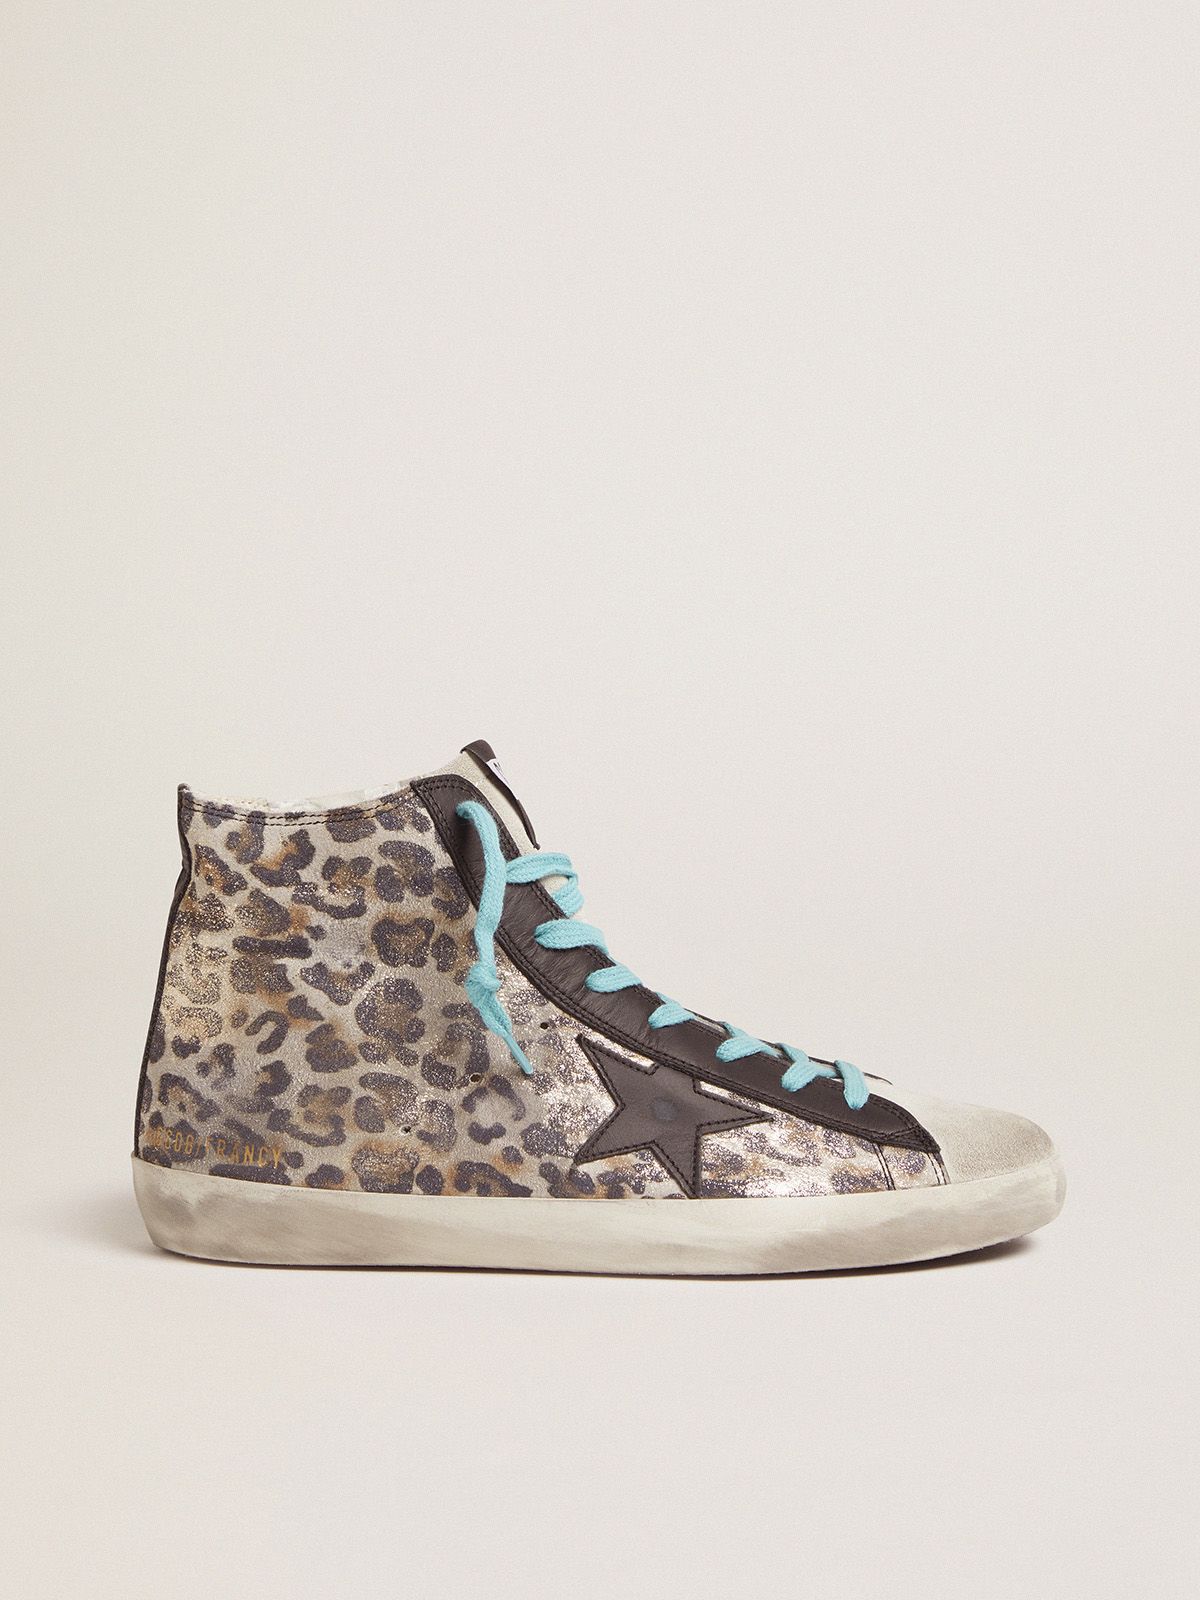 Leopard-print Francy sneakers with blue laces